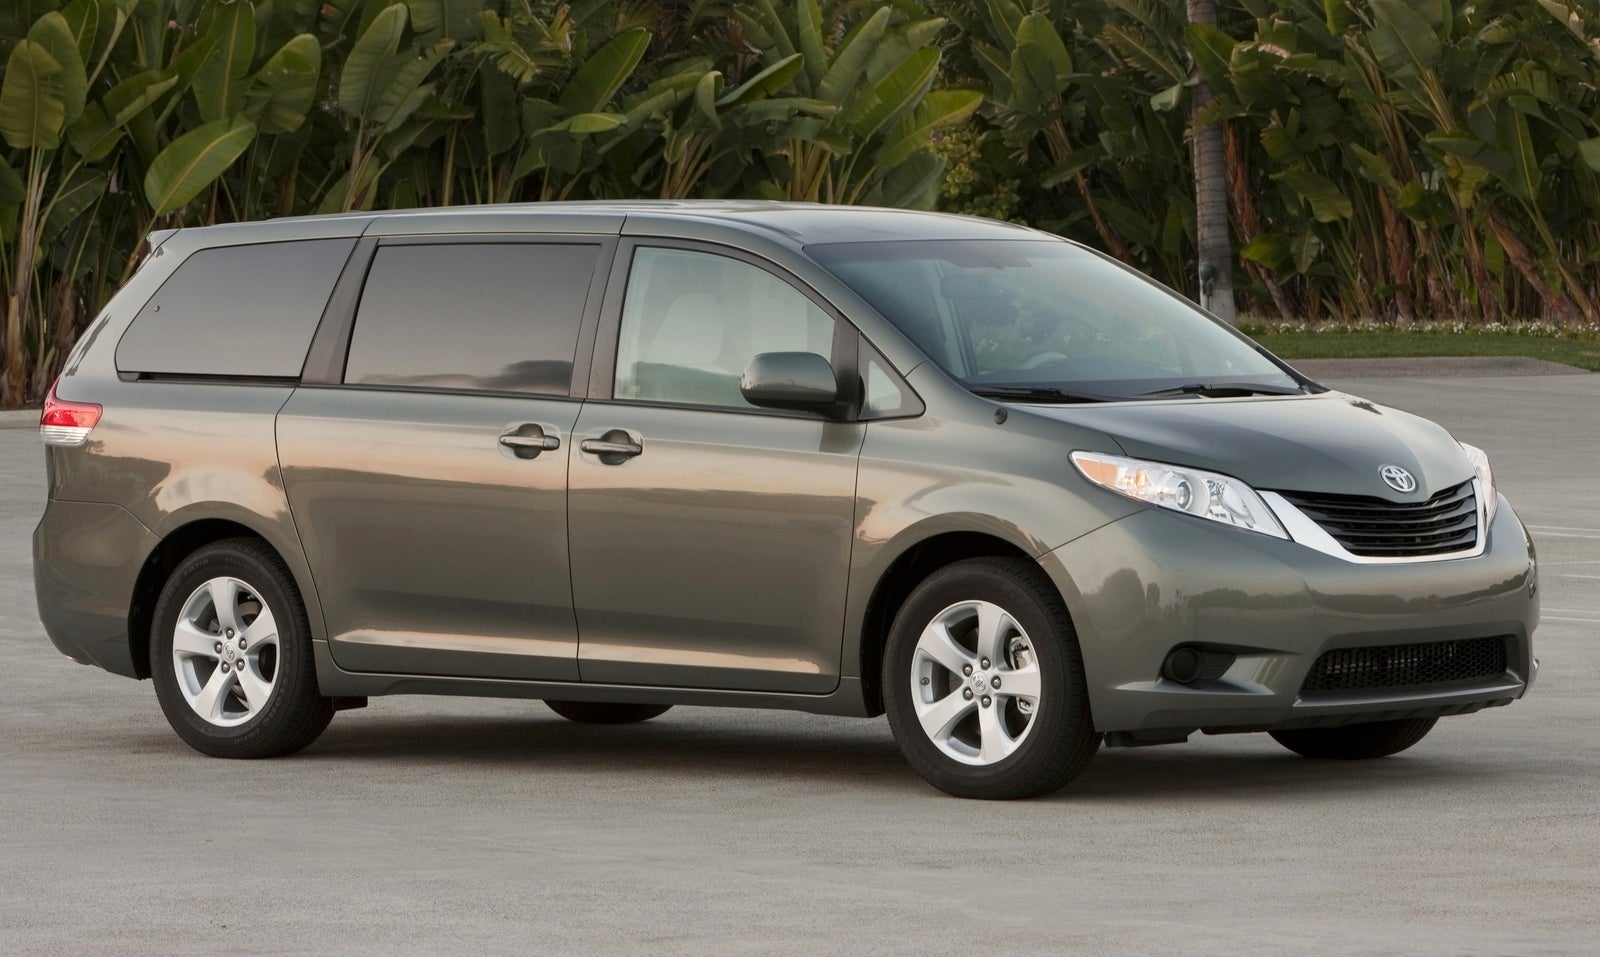 2014 Toyota Sienna Test Drive Review 